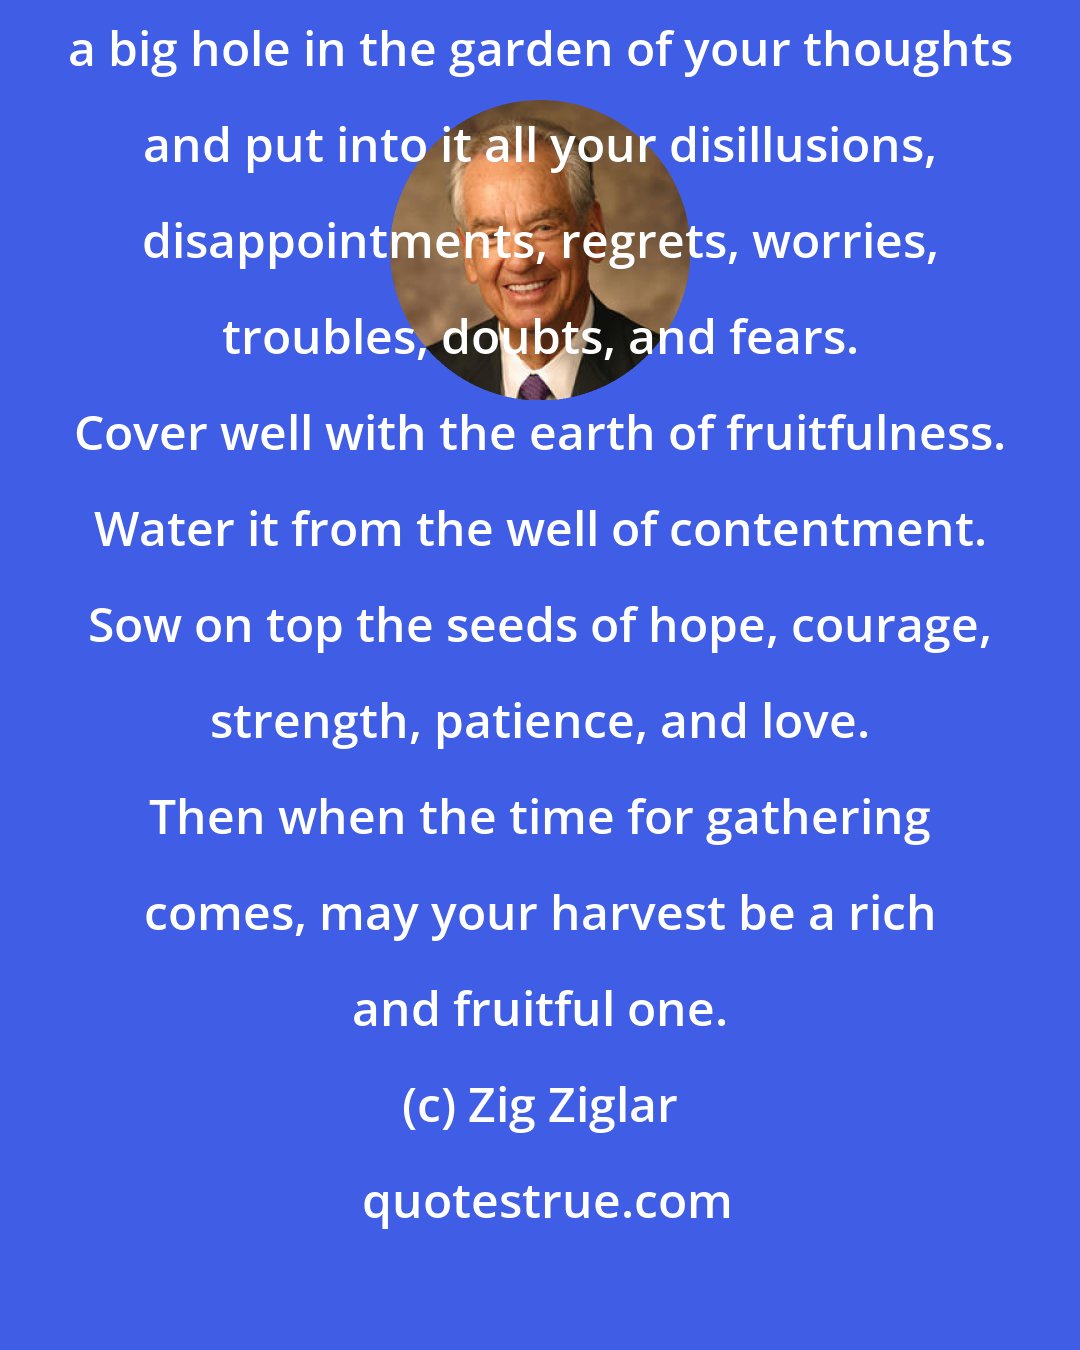 Zig Ziglar: The best recipe for happiness and contentment I've seen is this: dig a big hole in the garden of your thoughts and put into it all your disillusions, disappointments, regrets, worries, troubles, doubts, and fears. Cover well with the earth of fruitfulness. Water it from the well of contentment. Sow on top the seeds of hope, courage, strength, patience, and love. Then when the time for gathering comes, may your harvest be a rich and fruitful one.